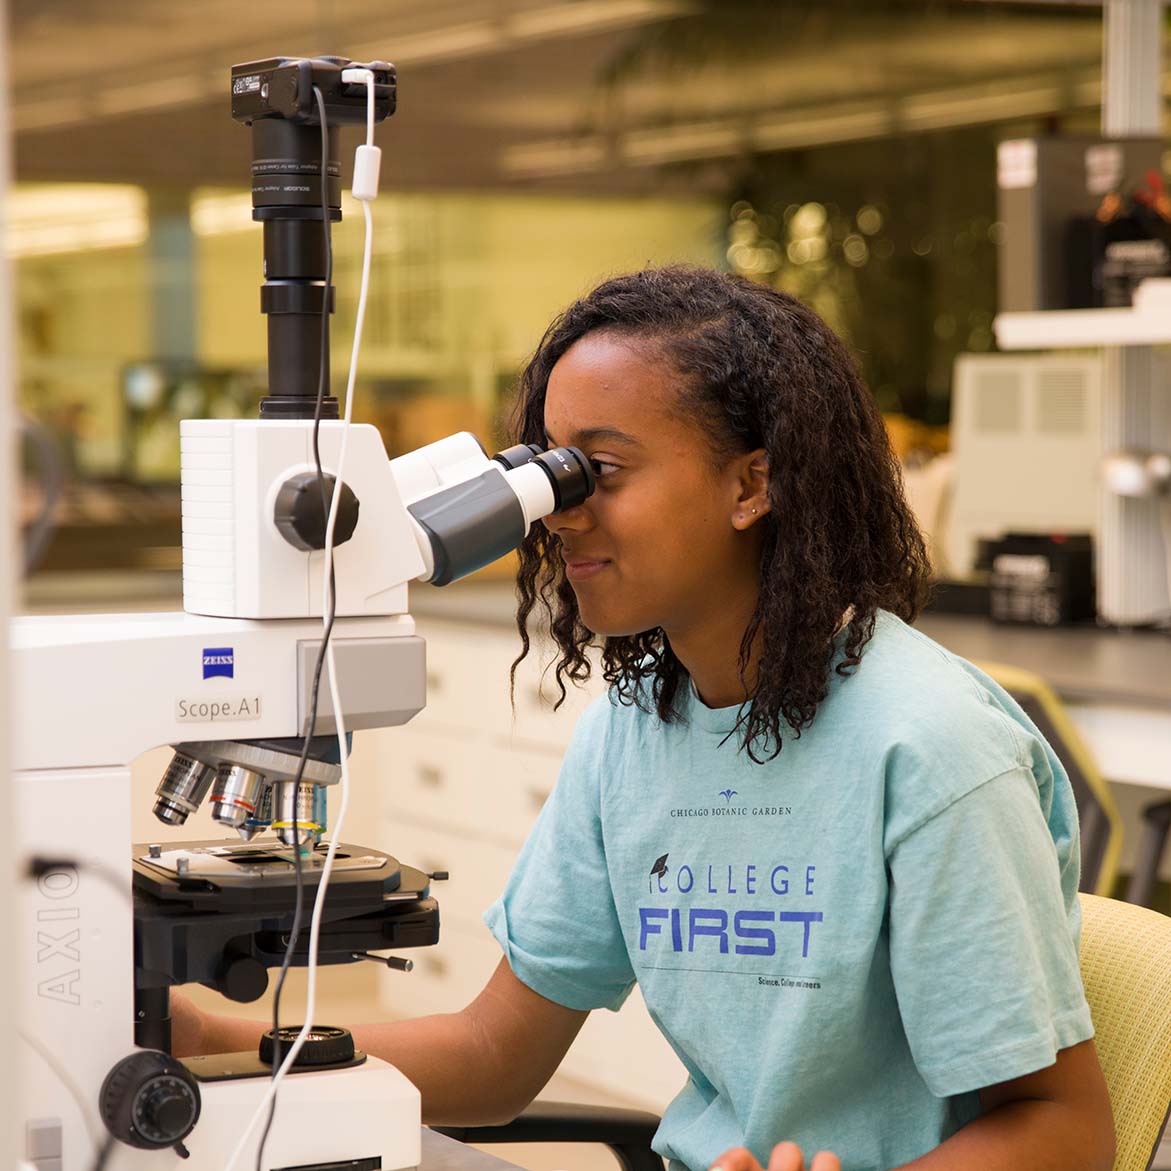 PHOTO: College First student working in the lab in 2013.